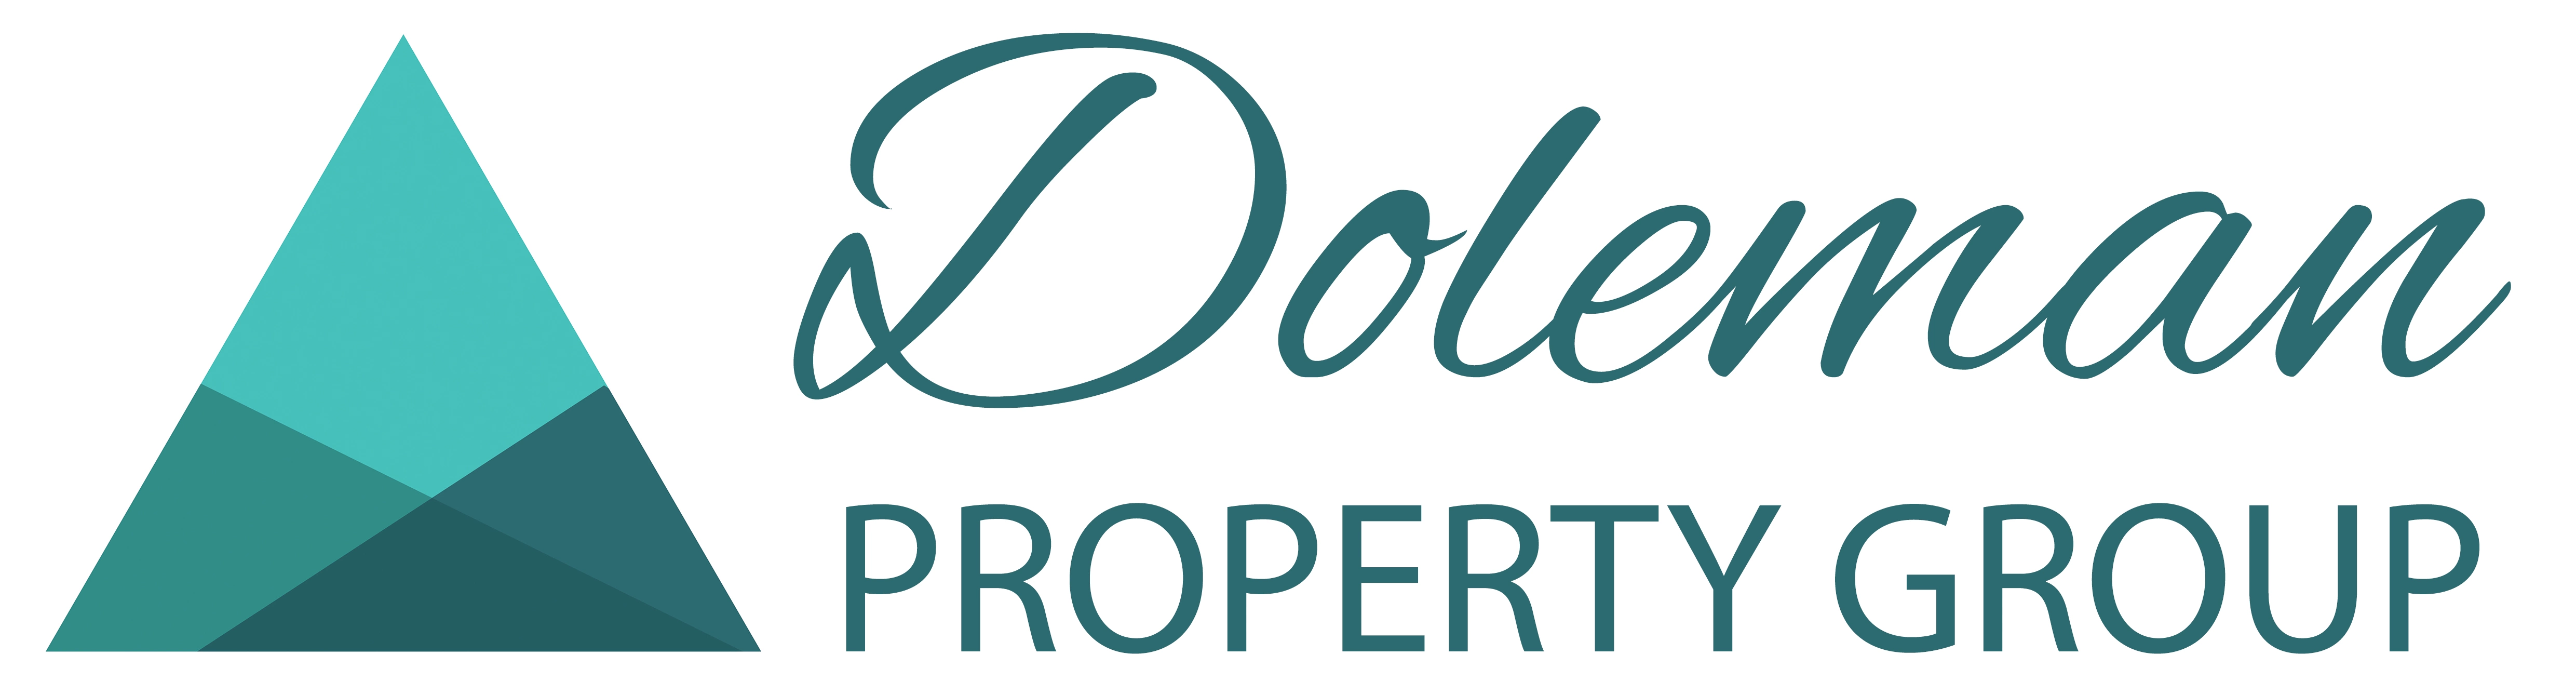 Doleman Property Group - Real Estate Agency